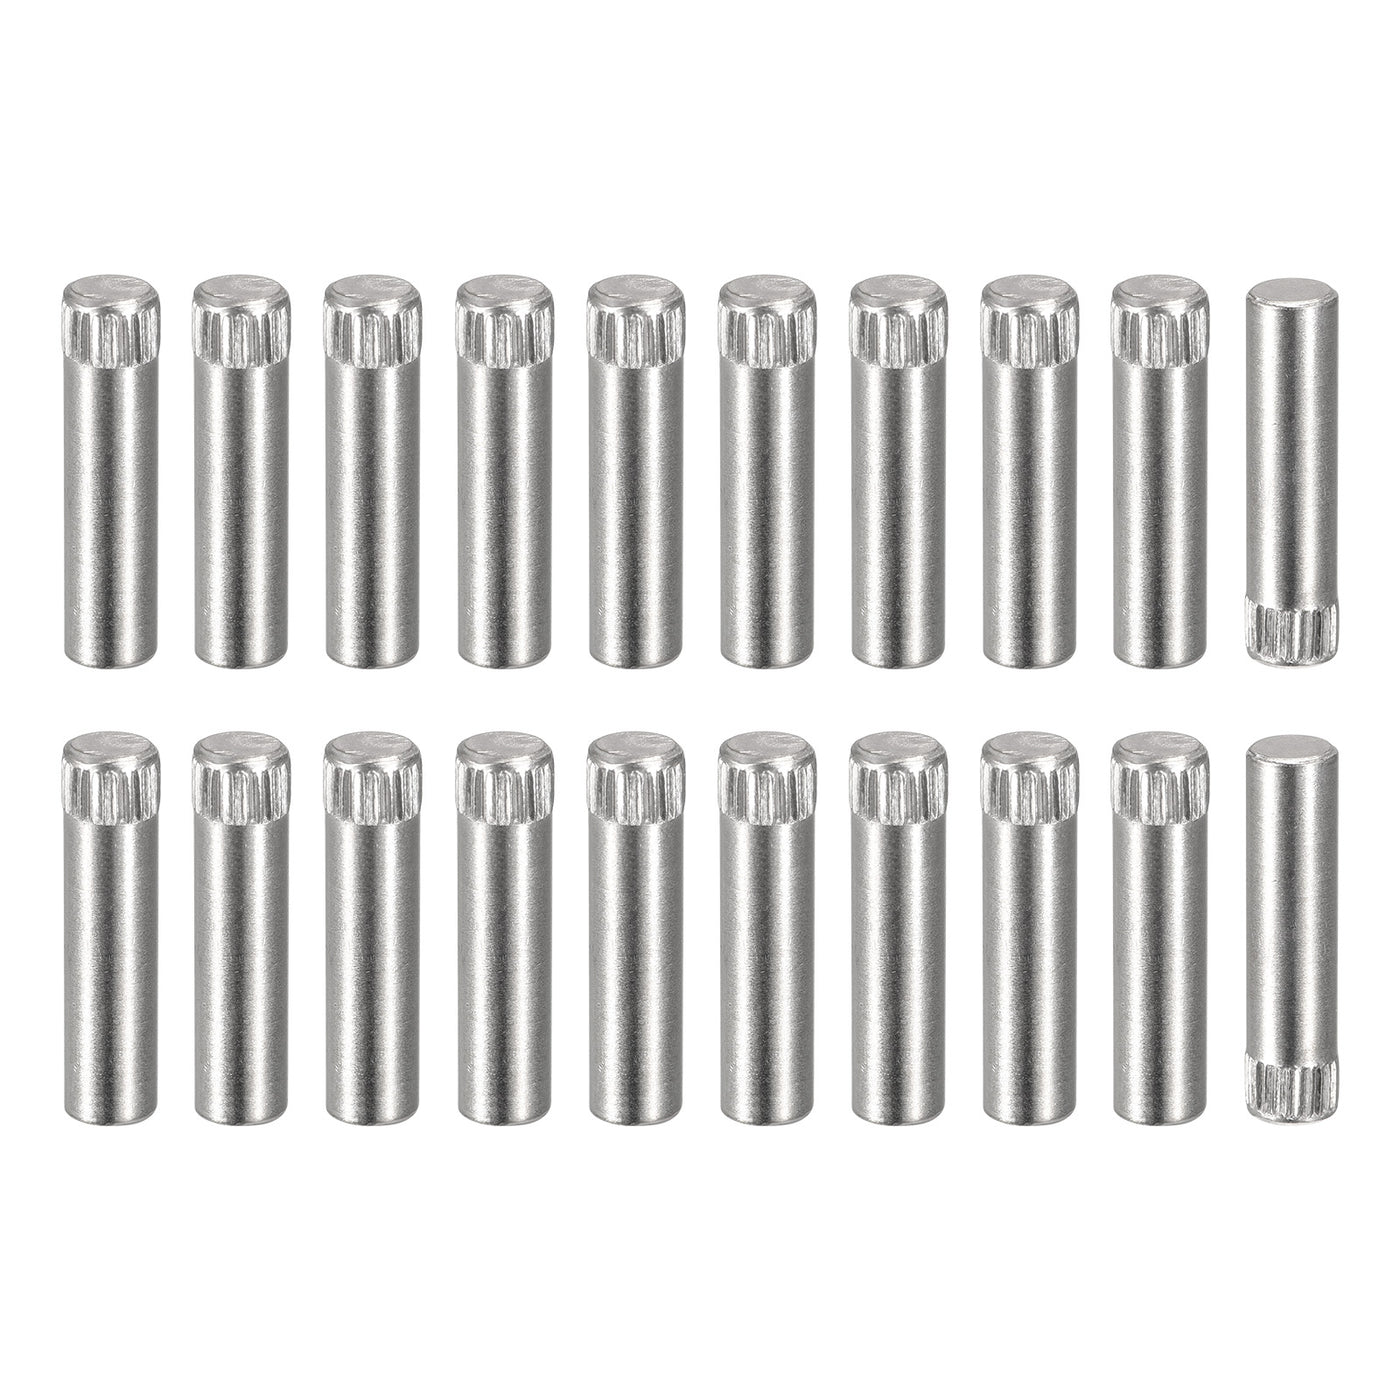 uxcell Uxcell 6x25mm 304 Stainless Steel Dowel Pins, 20Pcs Knurled Head Flat End Dowel Pin